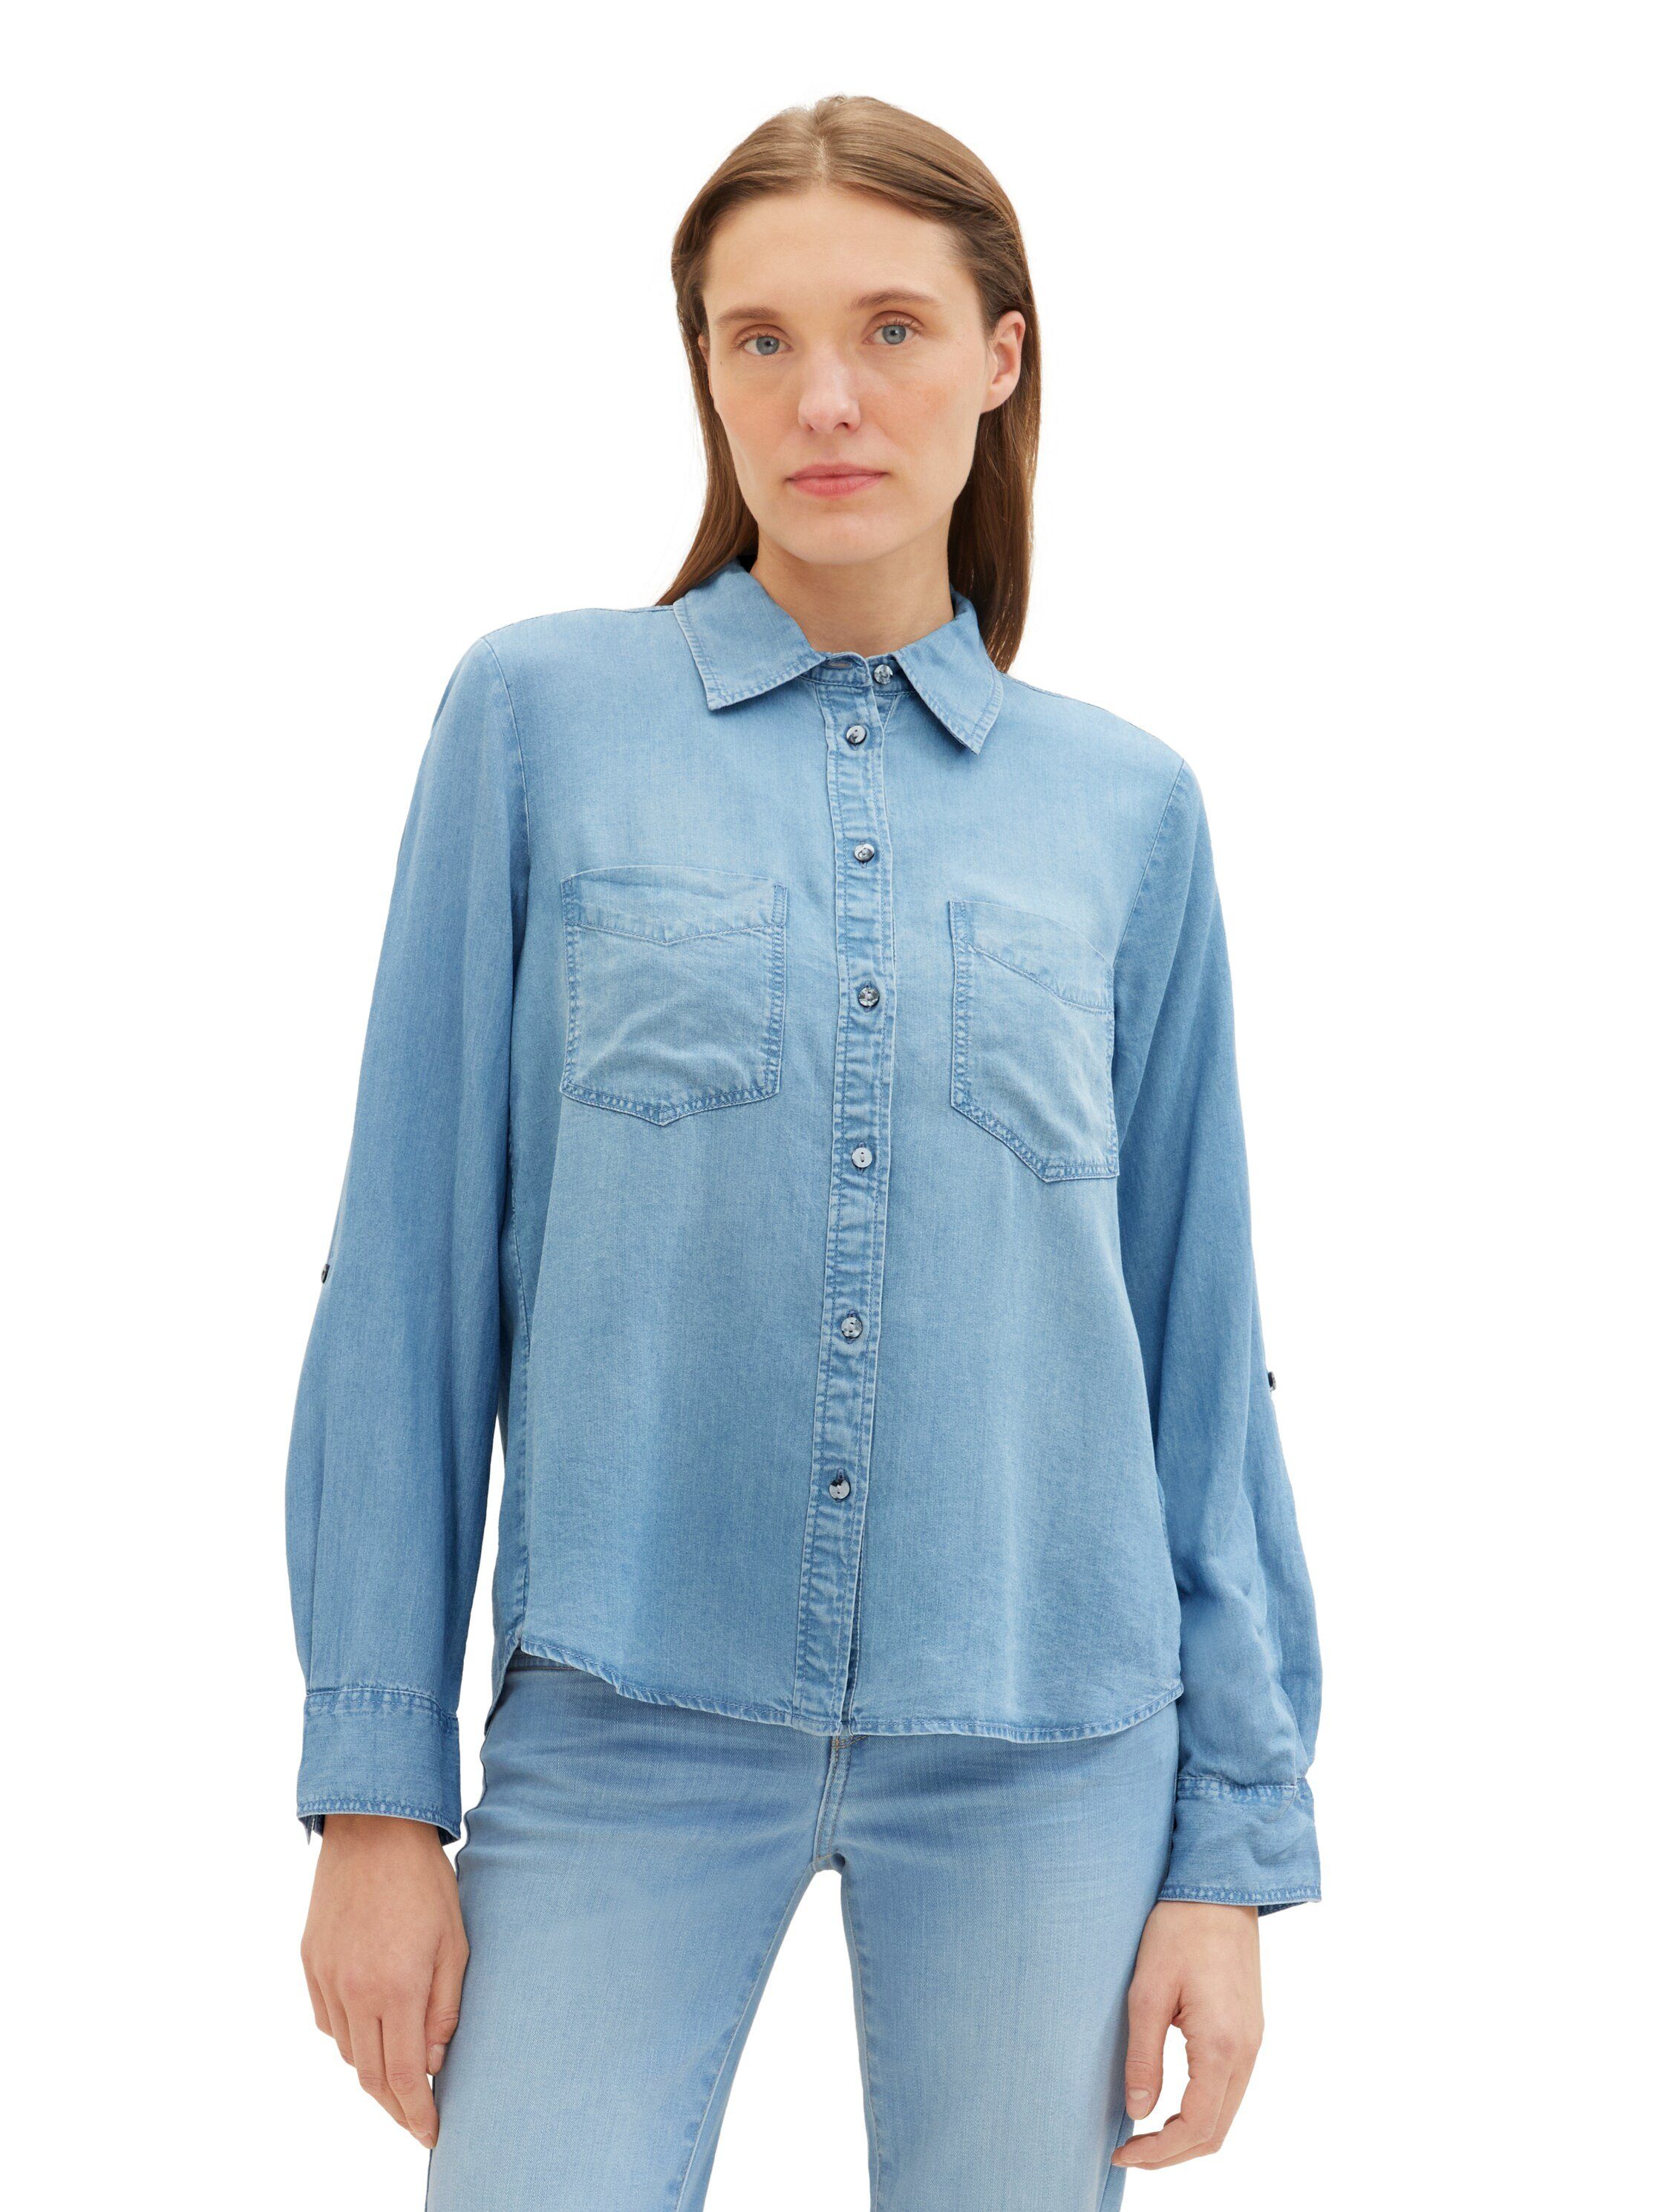 Tom Tailor Jeans blouse